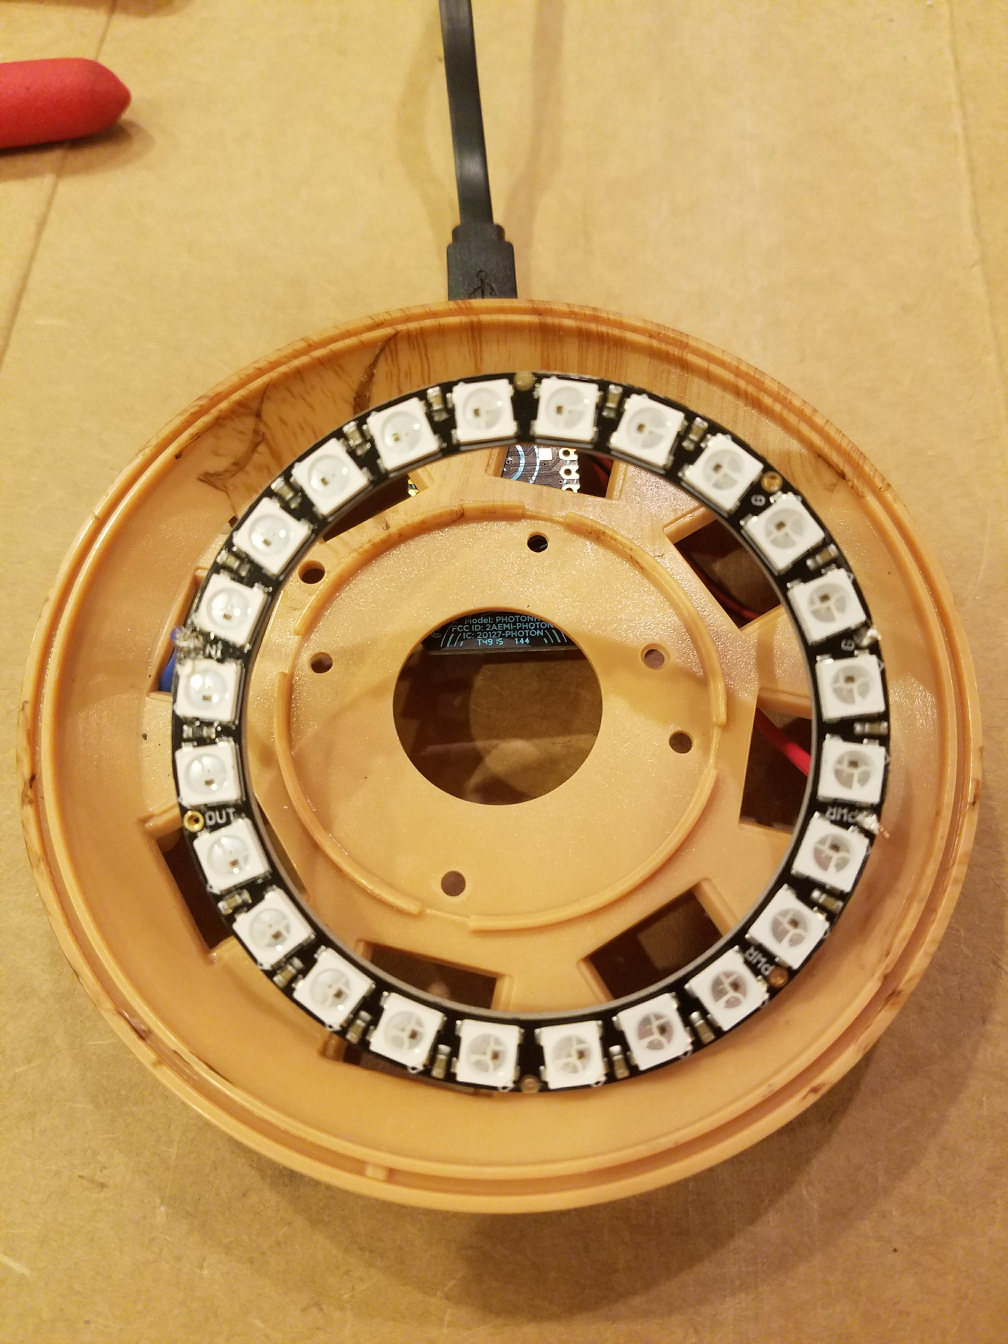 NeoPixel soldered to the Photon